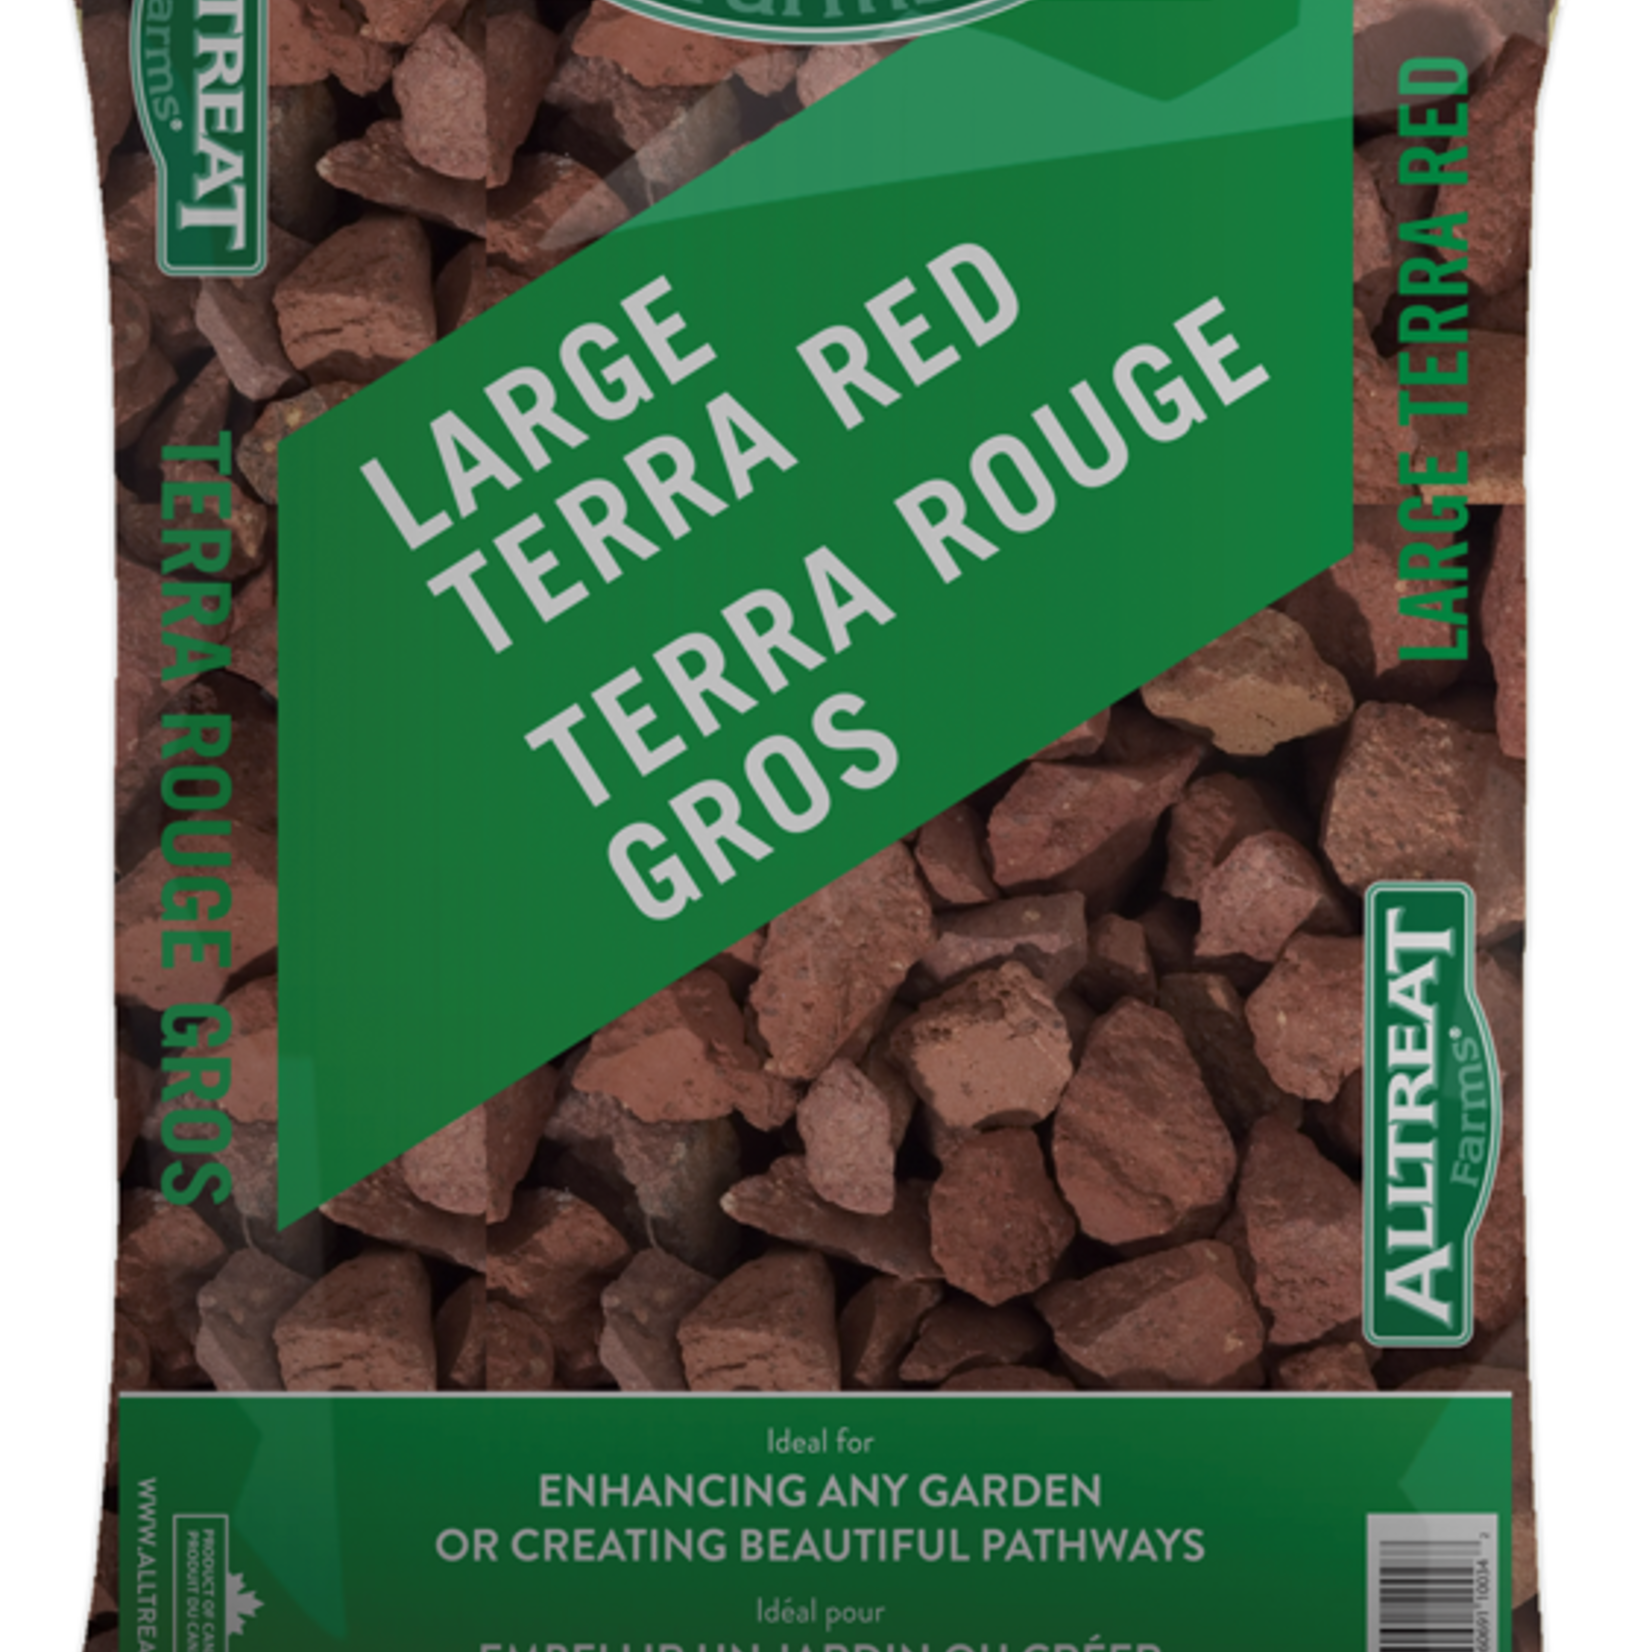 Terra Red Stone – Large 18 kg